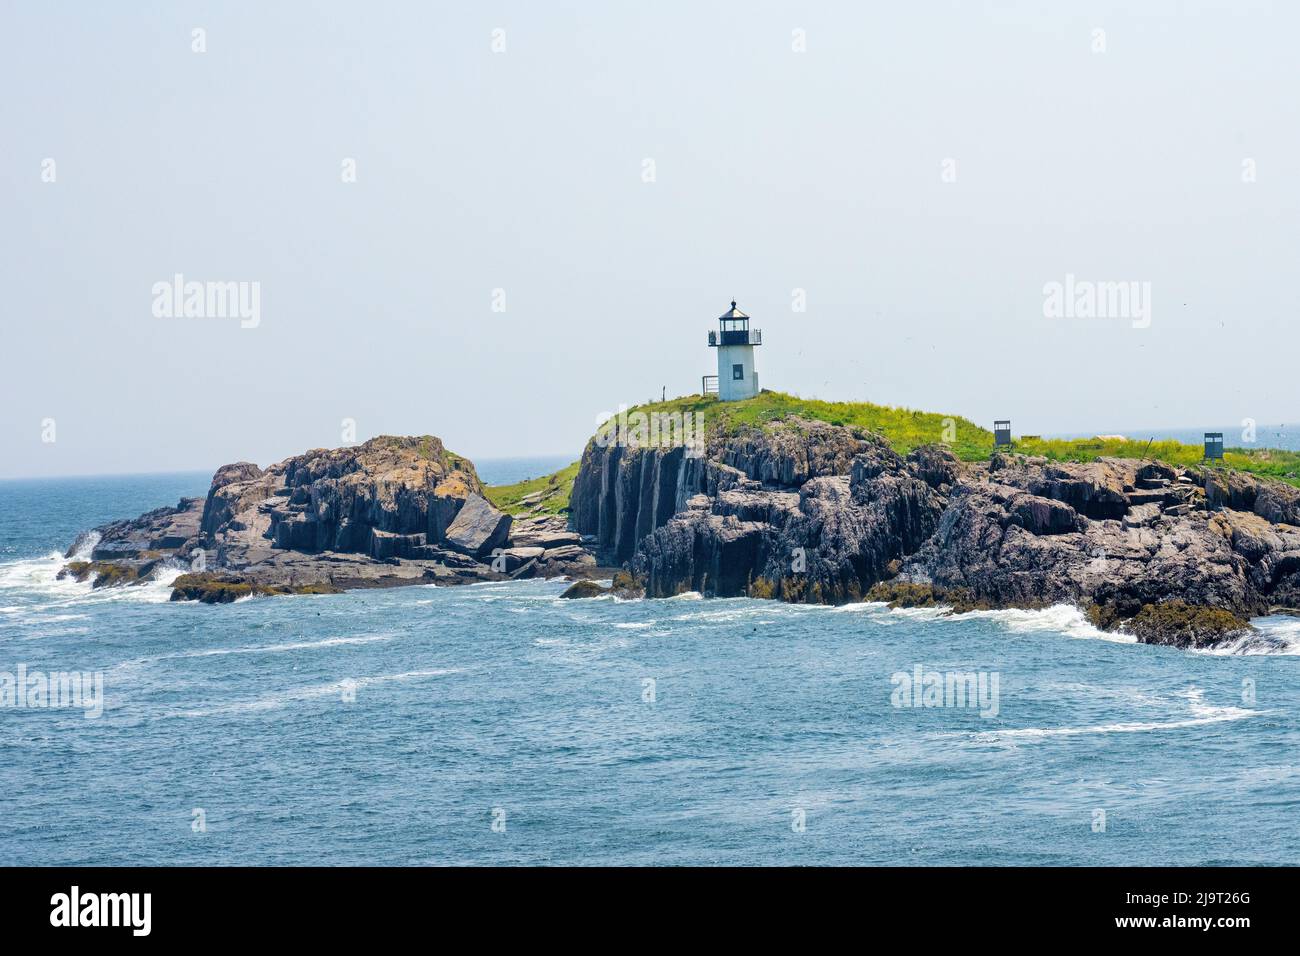 Pond Island Light is a lighthouse at the mouth of the Kennebec River, Maine. Built in 1855. (Editorial Use Only) Stock Photo